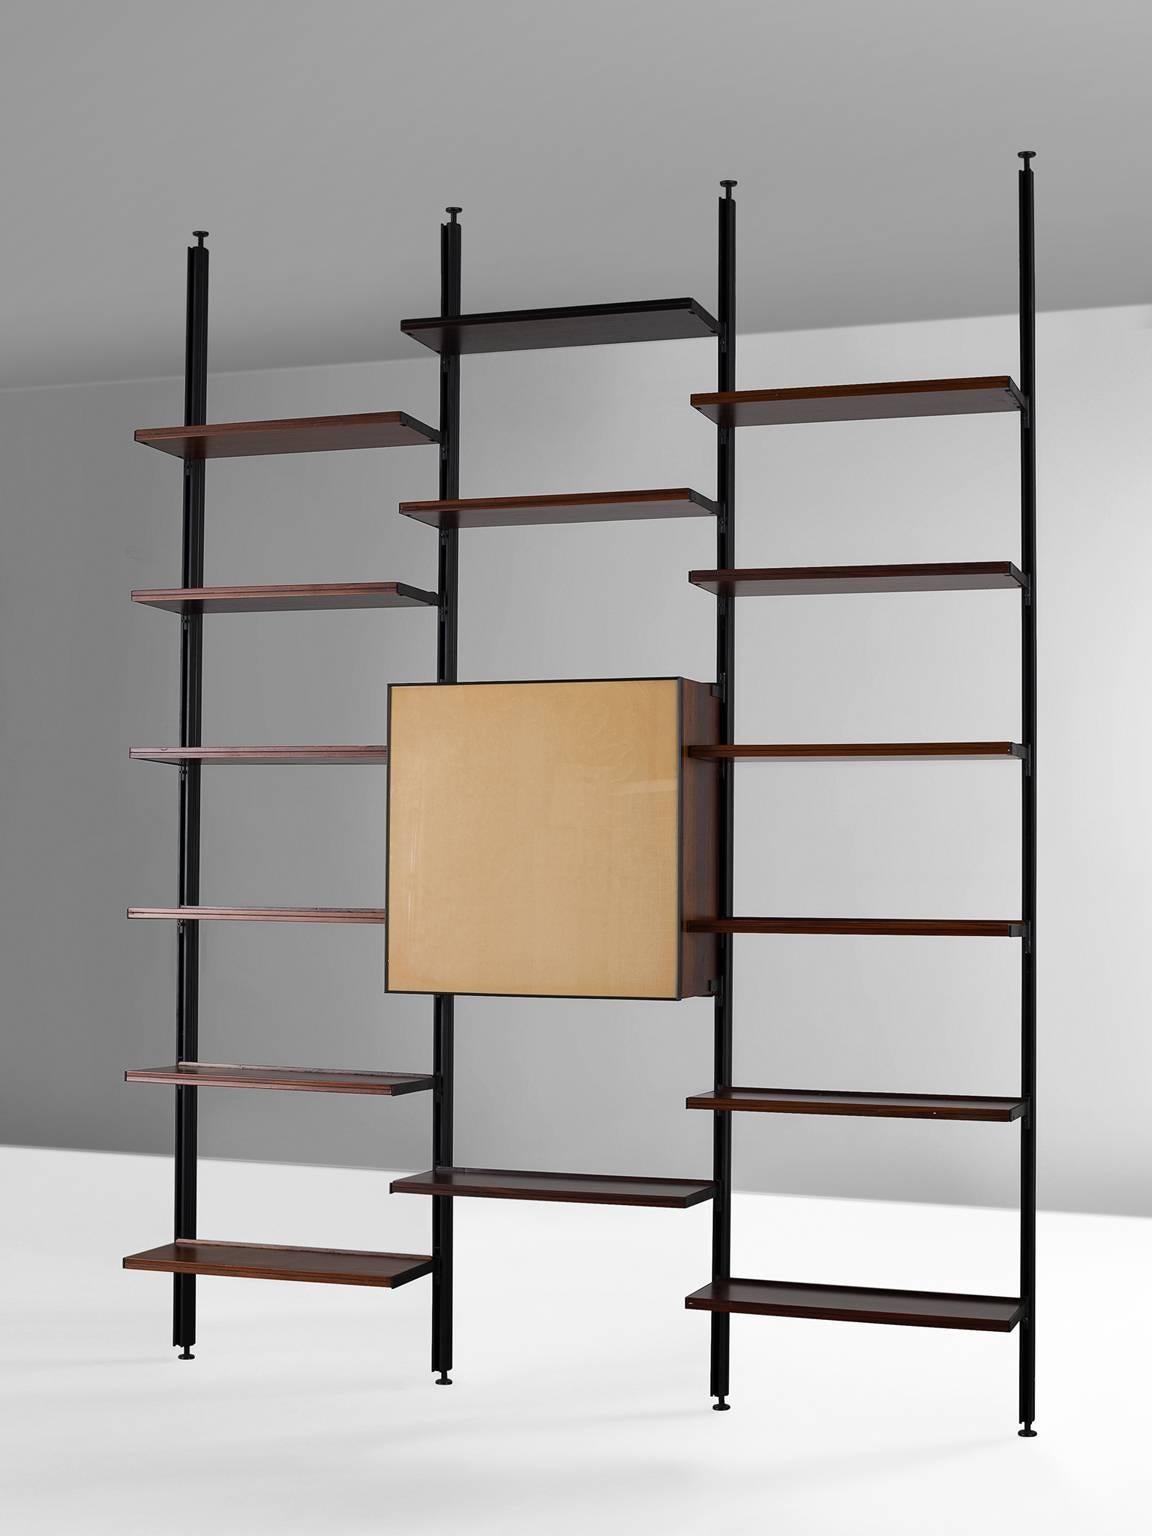 Bookcase, in metal and rosewood, by Osvaldo Borsani for Tecno, Italy, 1950s.

This E22 wall unit by Borsani for Tecno features fifteen shelves and one cabinet. According to Osvaldo Borsani the home needs to be orderly, comfortable and easily